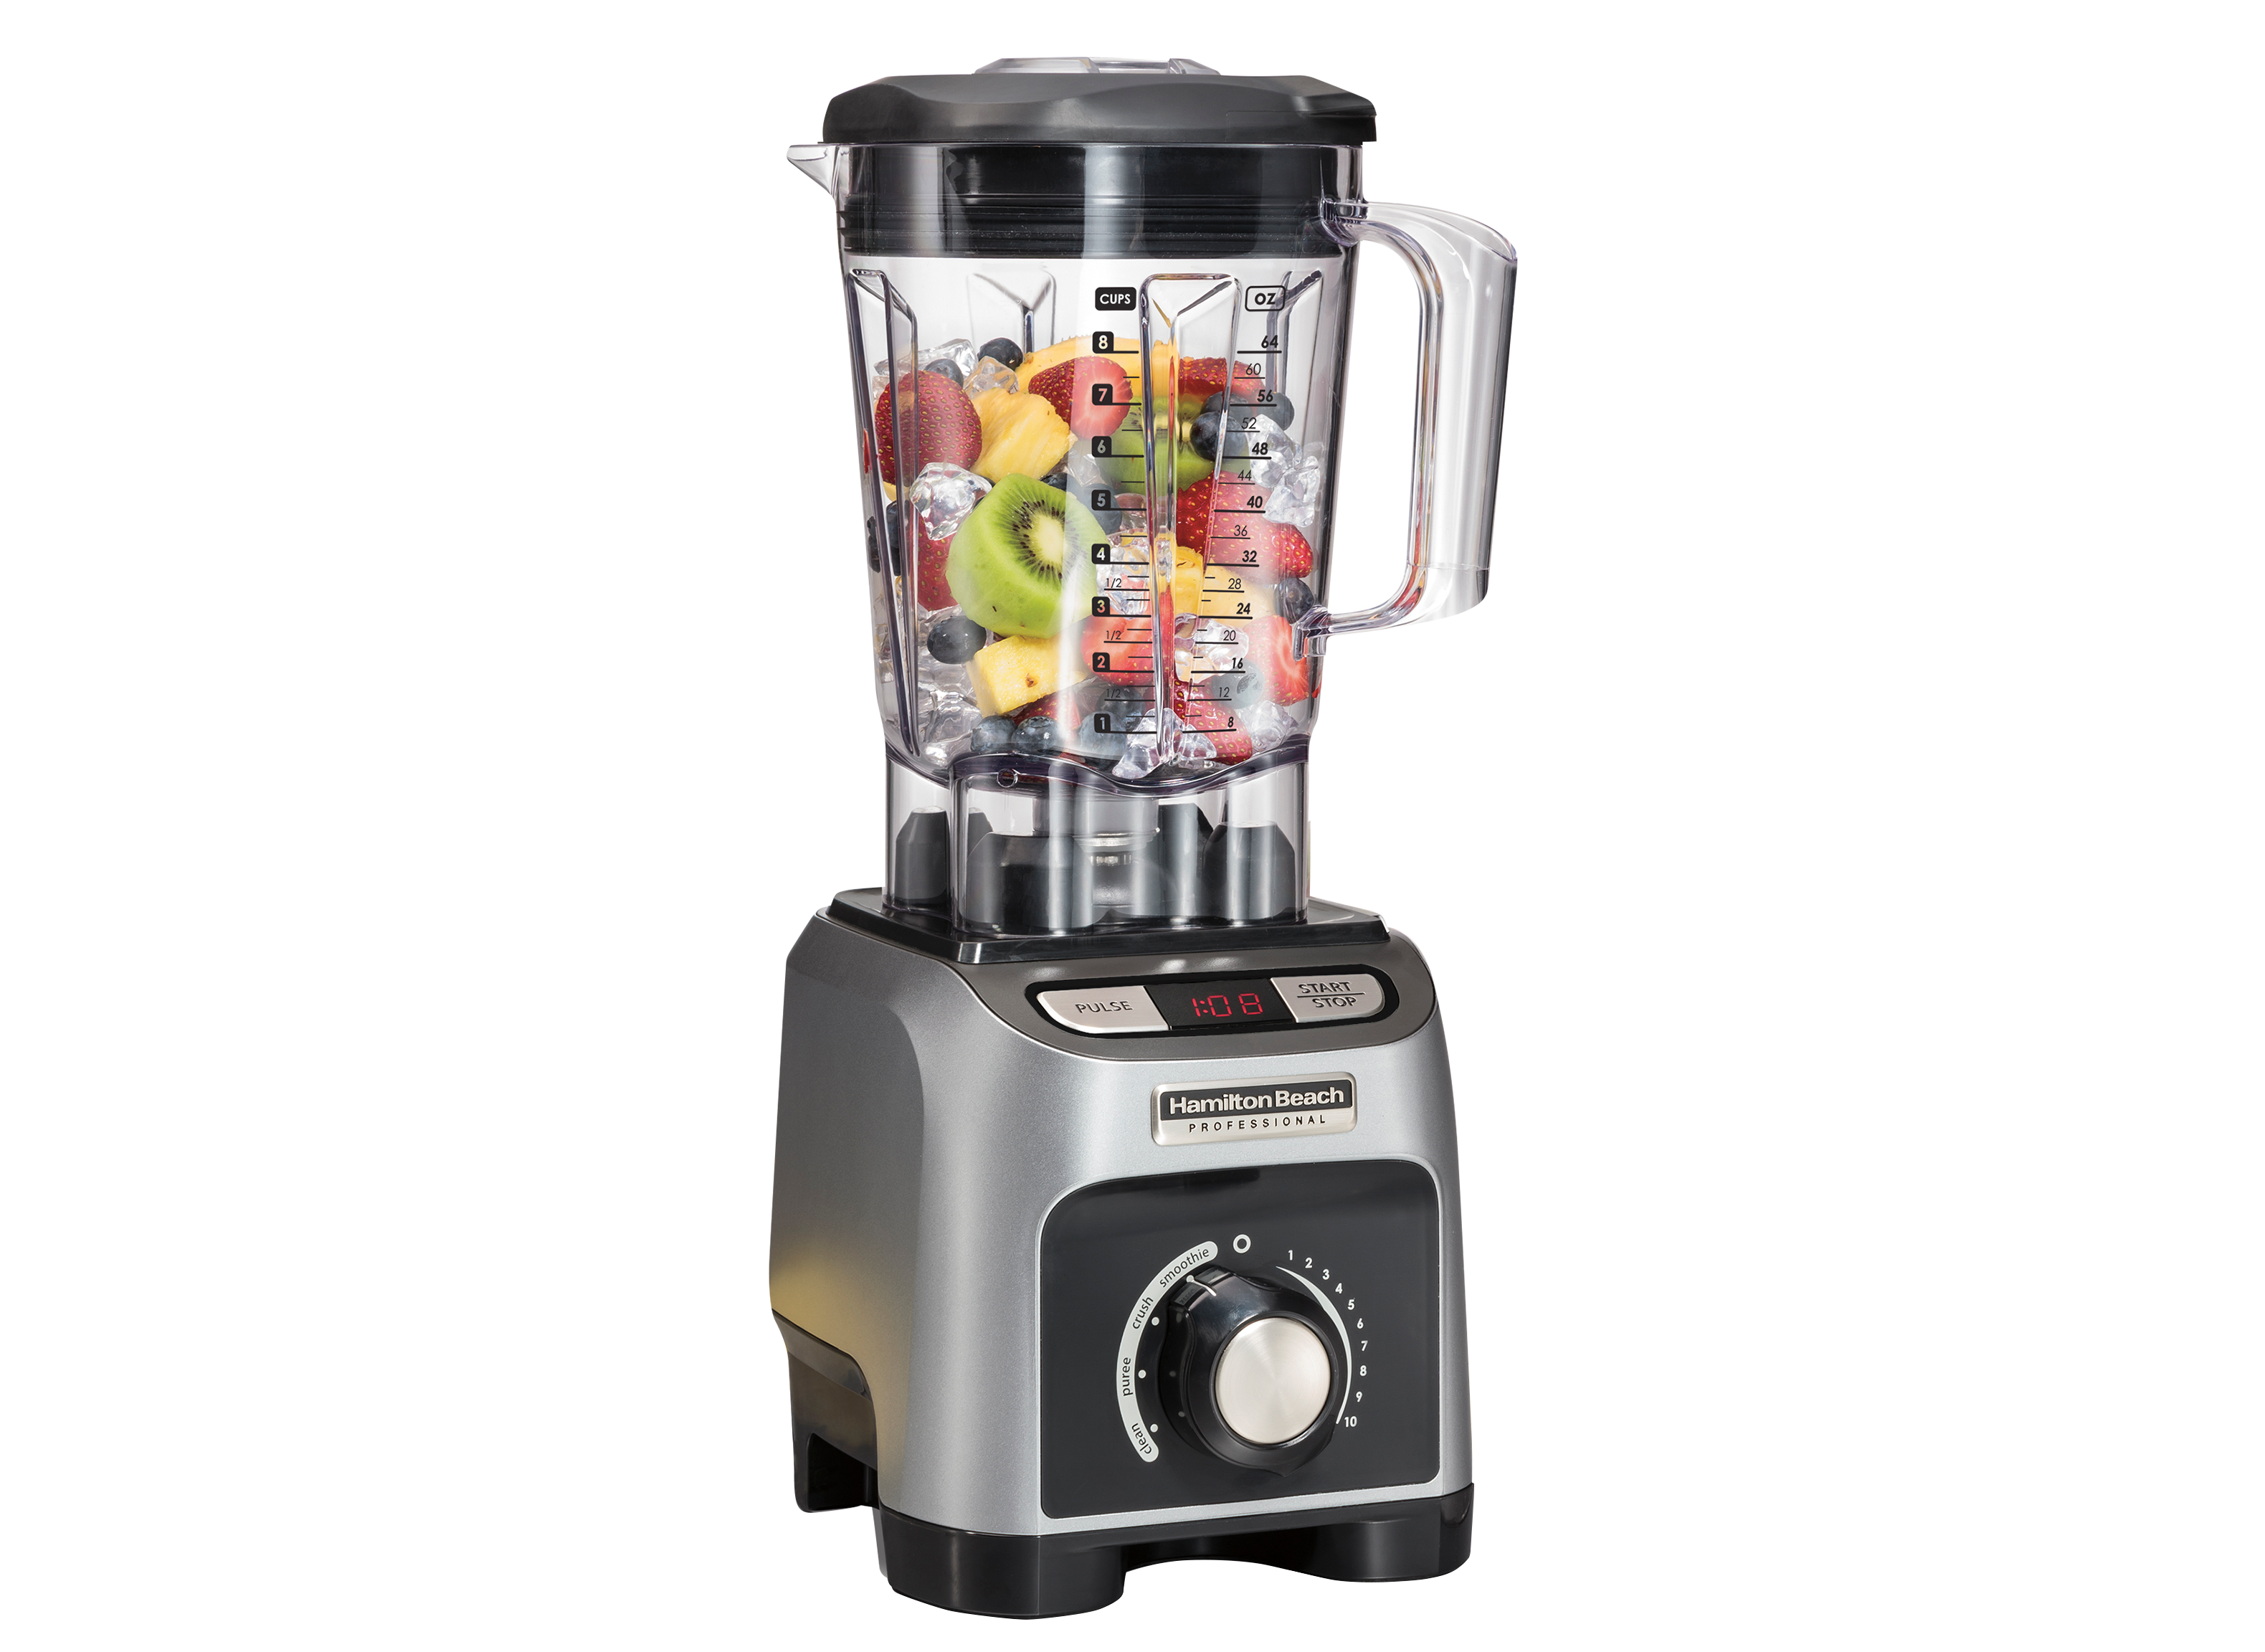 https://crdms.images.consumerreports.org/prod/products/cr/models/395660-full-size-blender-hamilton-beach-professional-58850-62146.png